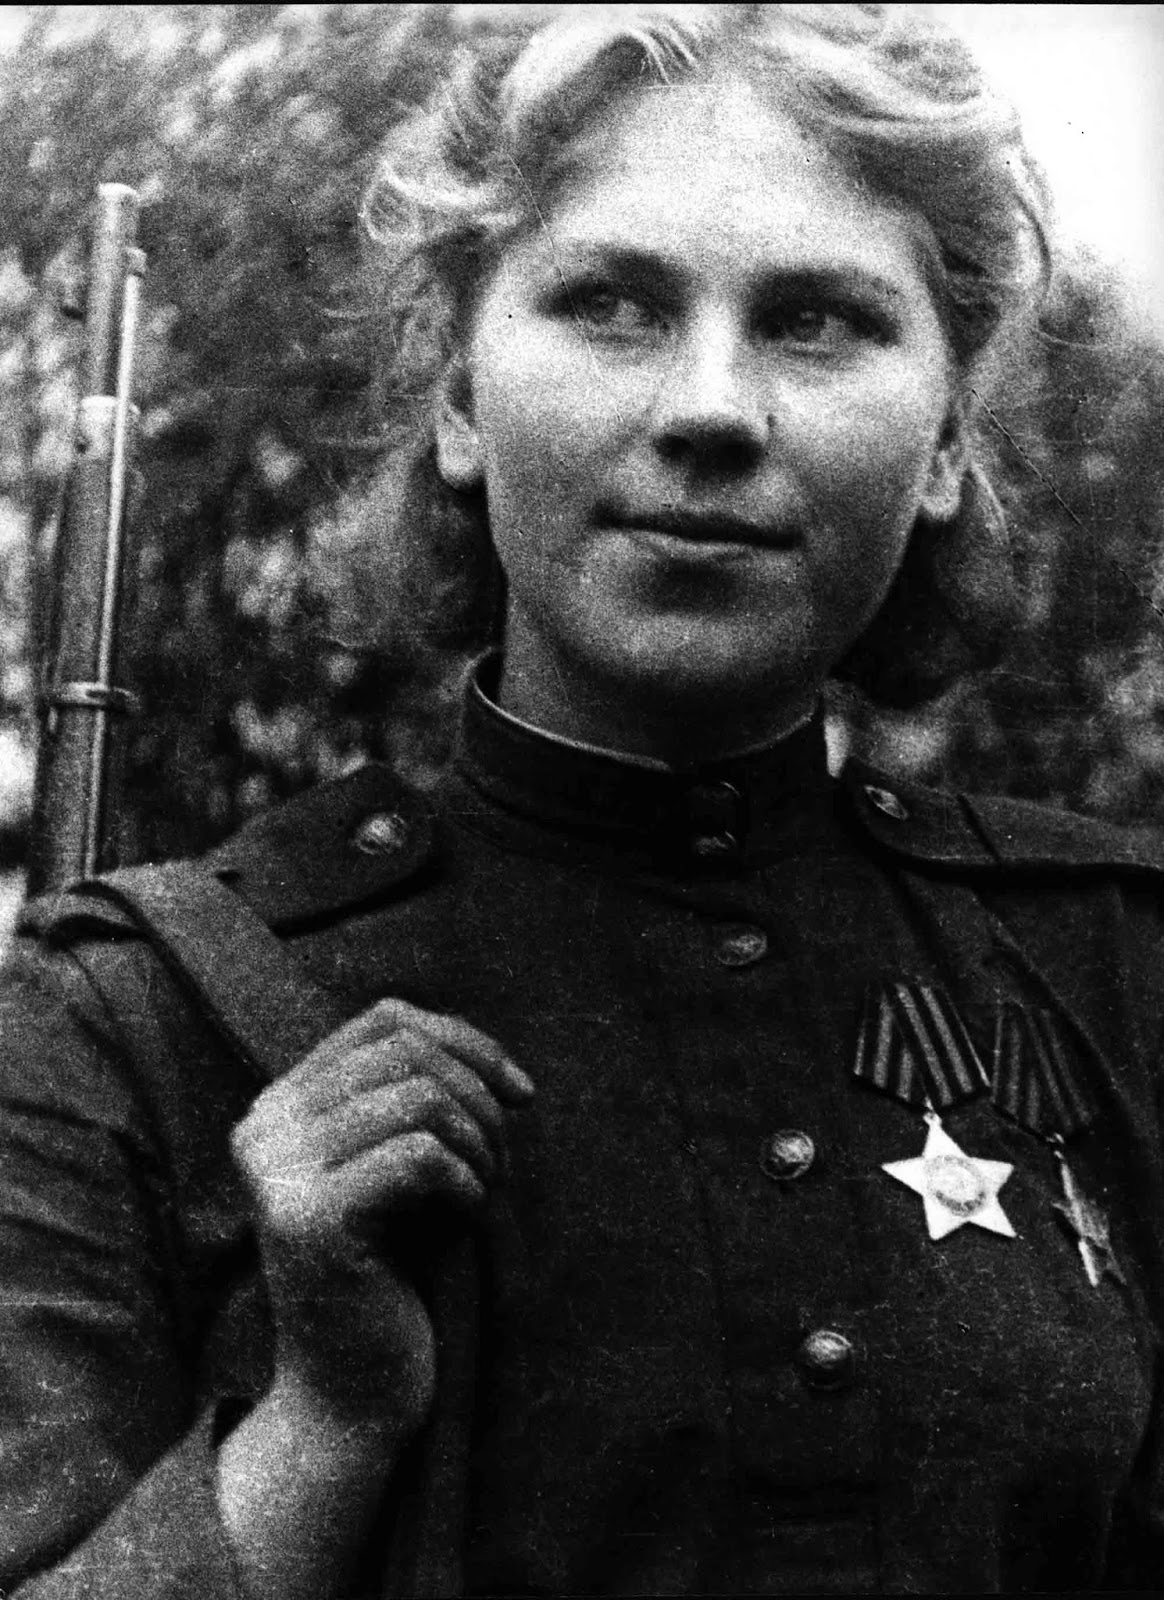 Roza Shanina was born on 3 April 1924 in the Russian village of Yedma (Arkhangelsk Oblast) to Anna Alexeyevna Shanina, a kolkhoz milkmaid, and Georgiy Mikhailovich Shanin, a logger who had been disabled by a wound received during World War I.